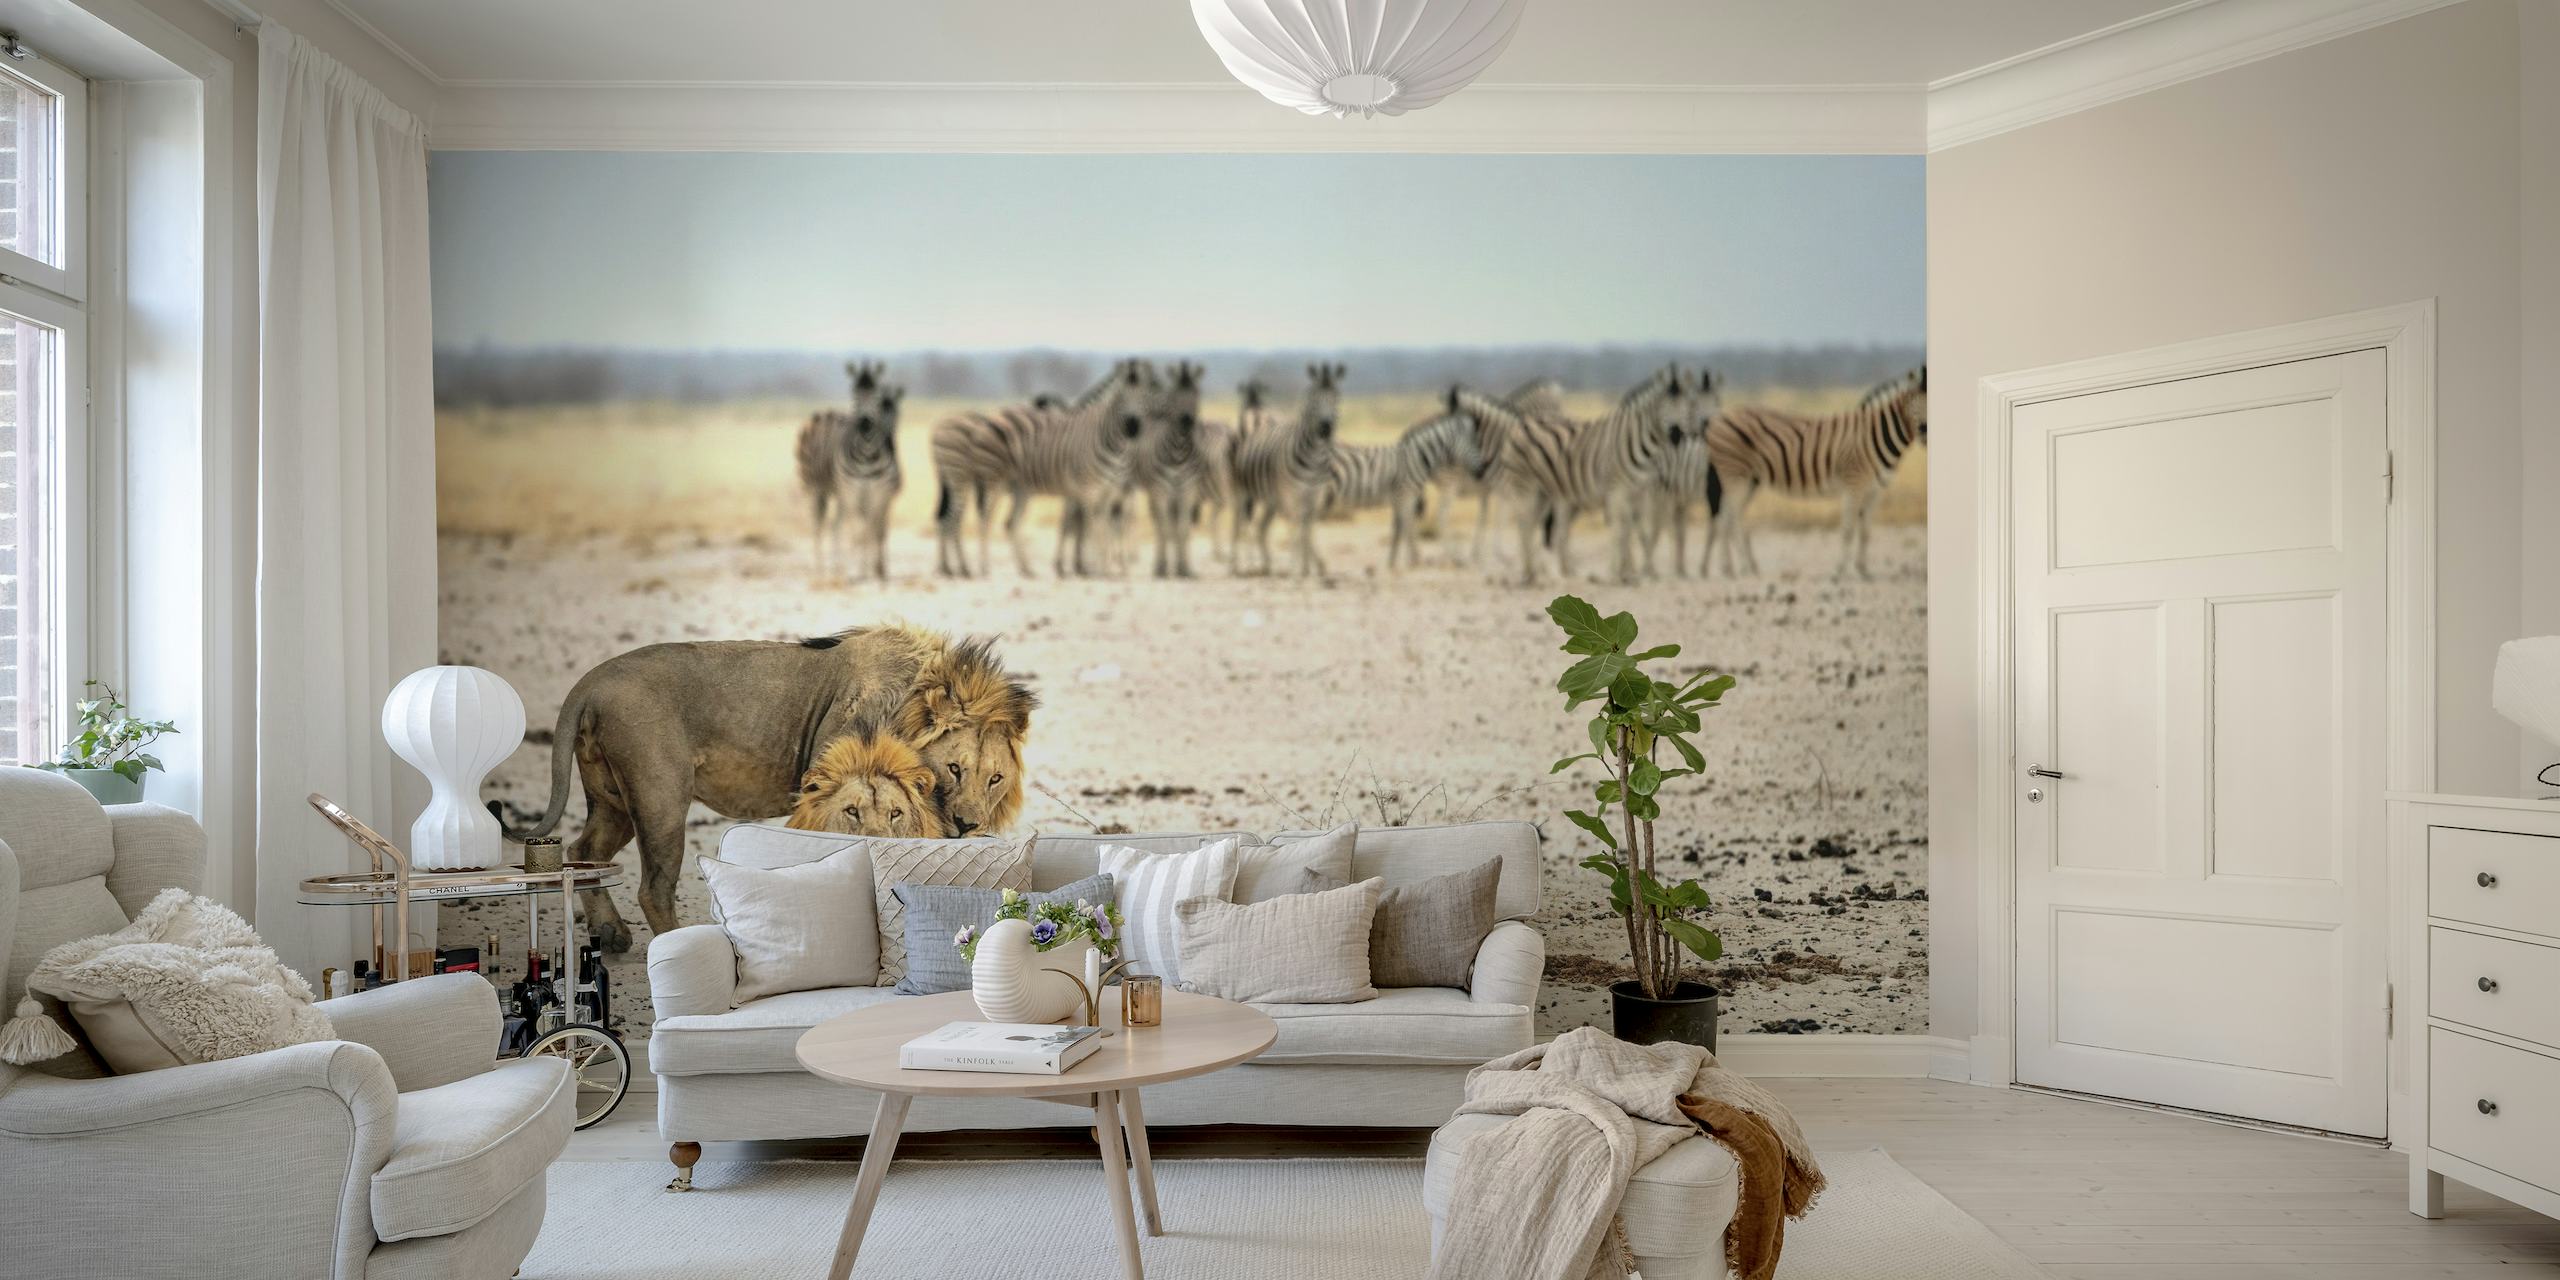 Lion and zebras in an African savanna wall mural